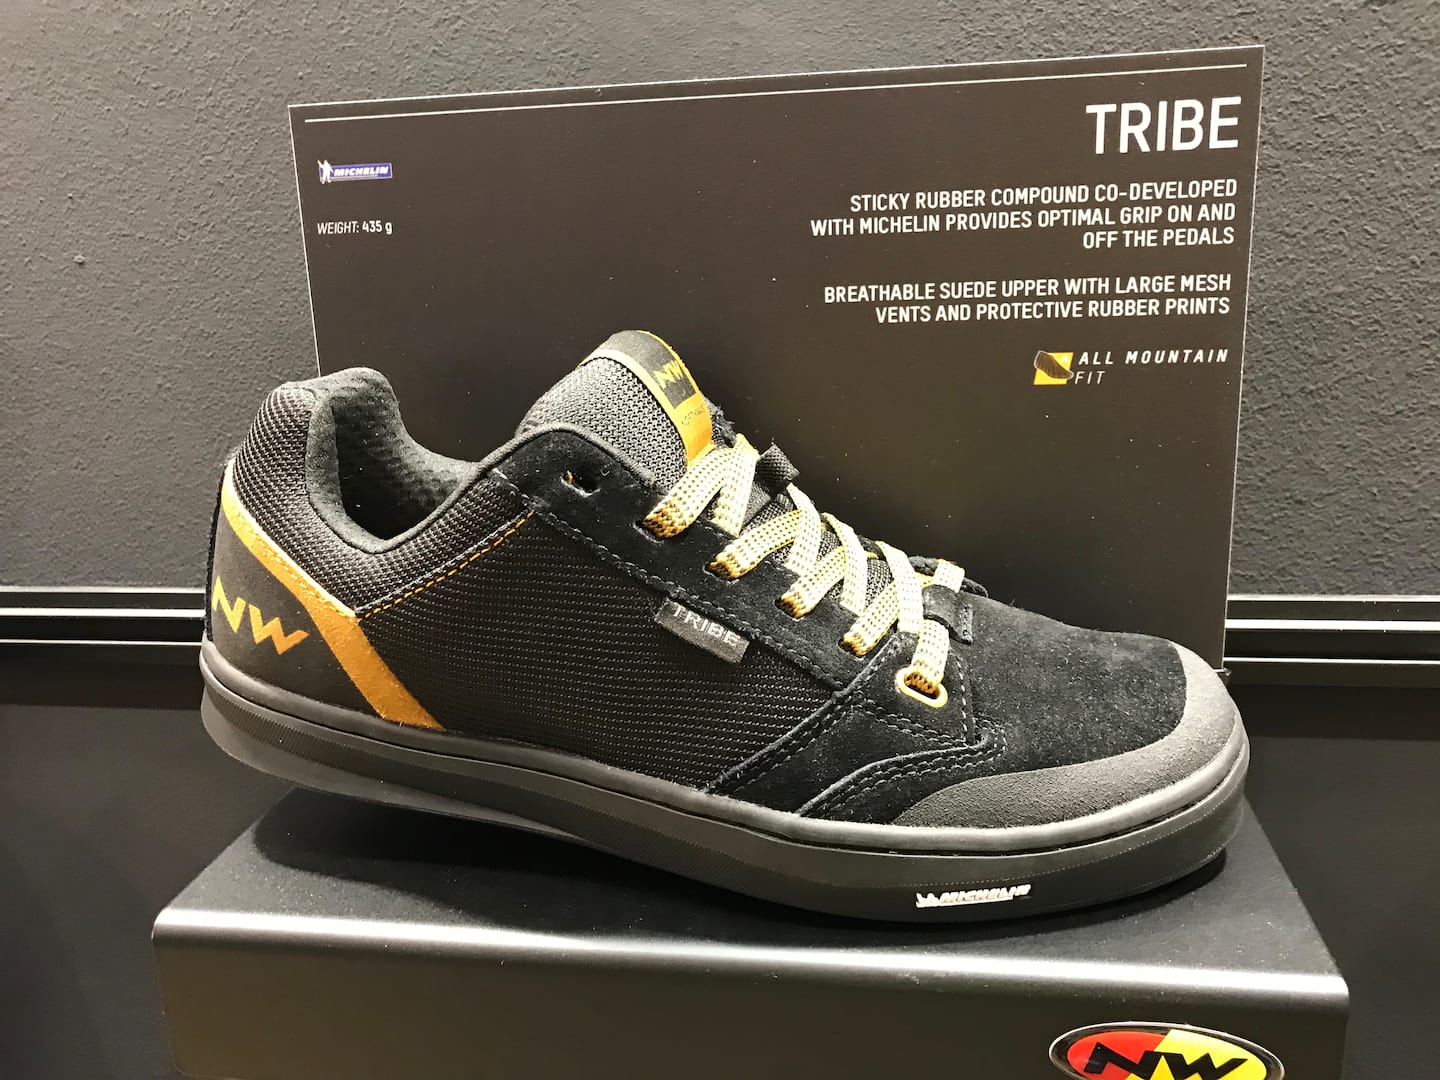 northwave tribe mtb shoes 2019